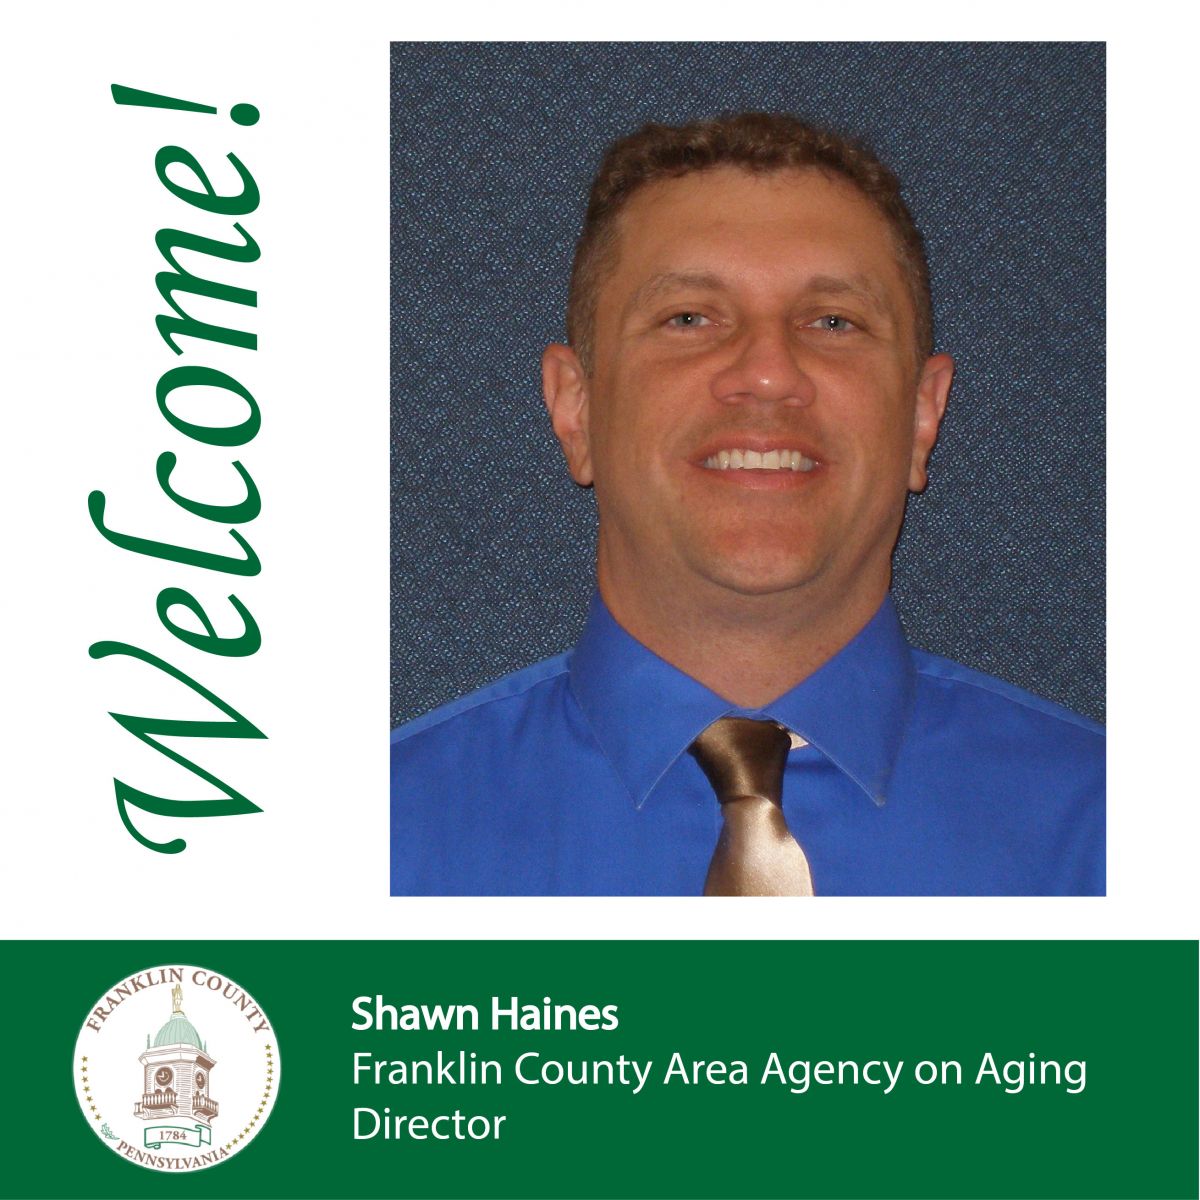 Welcome Shawn Haines Franklin County Area Agency on Aging Director